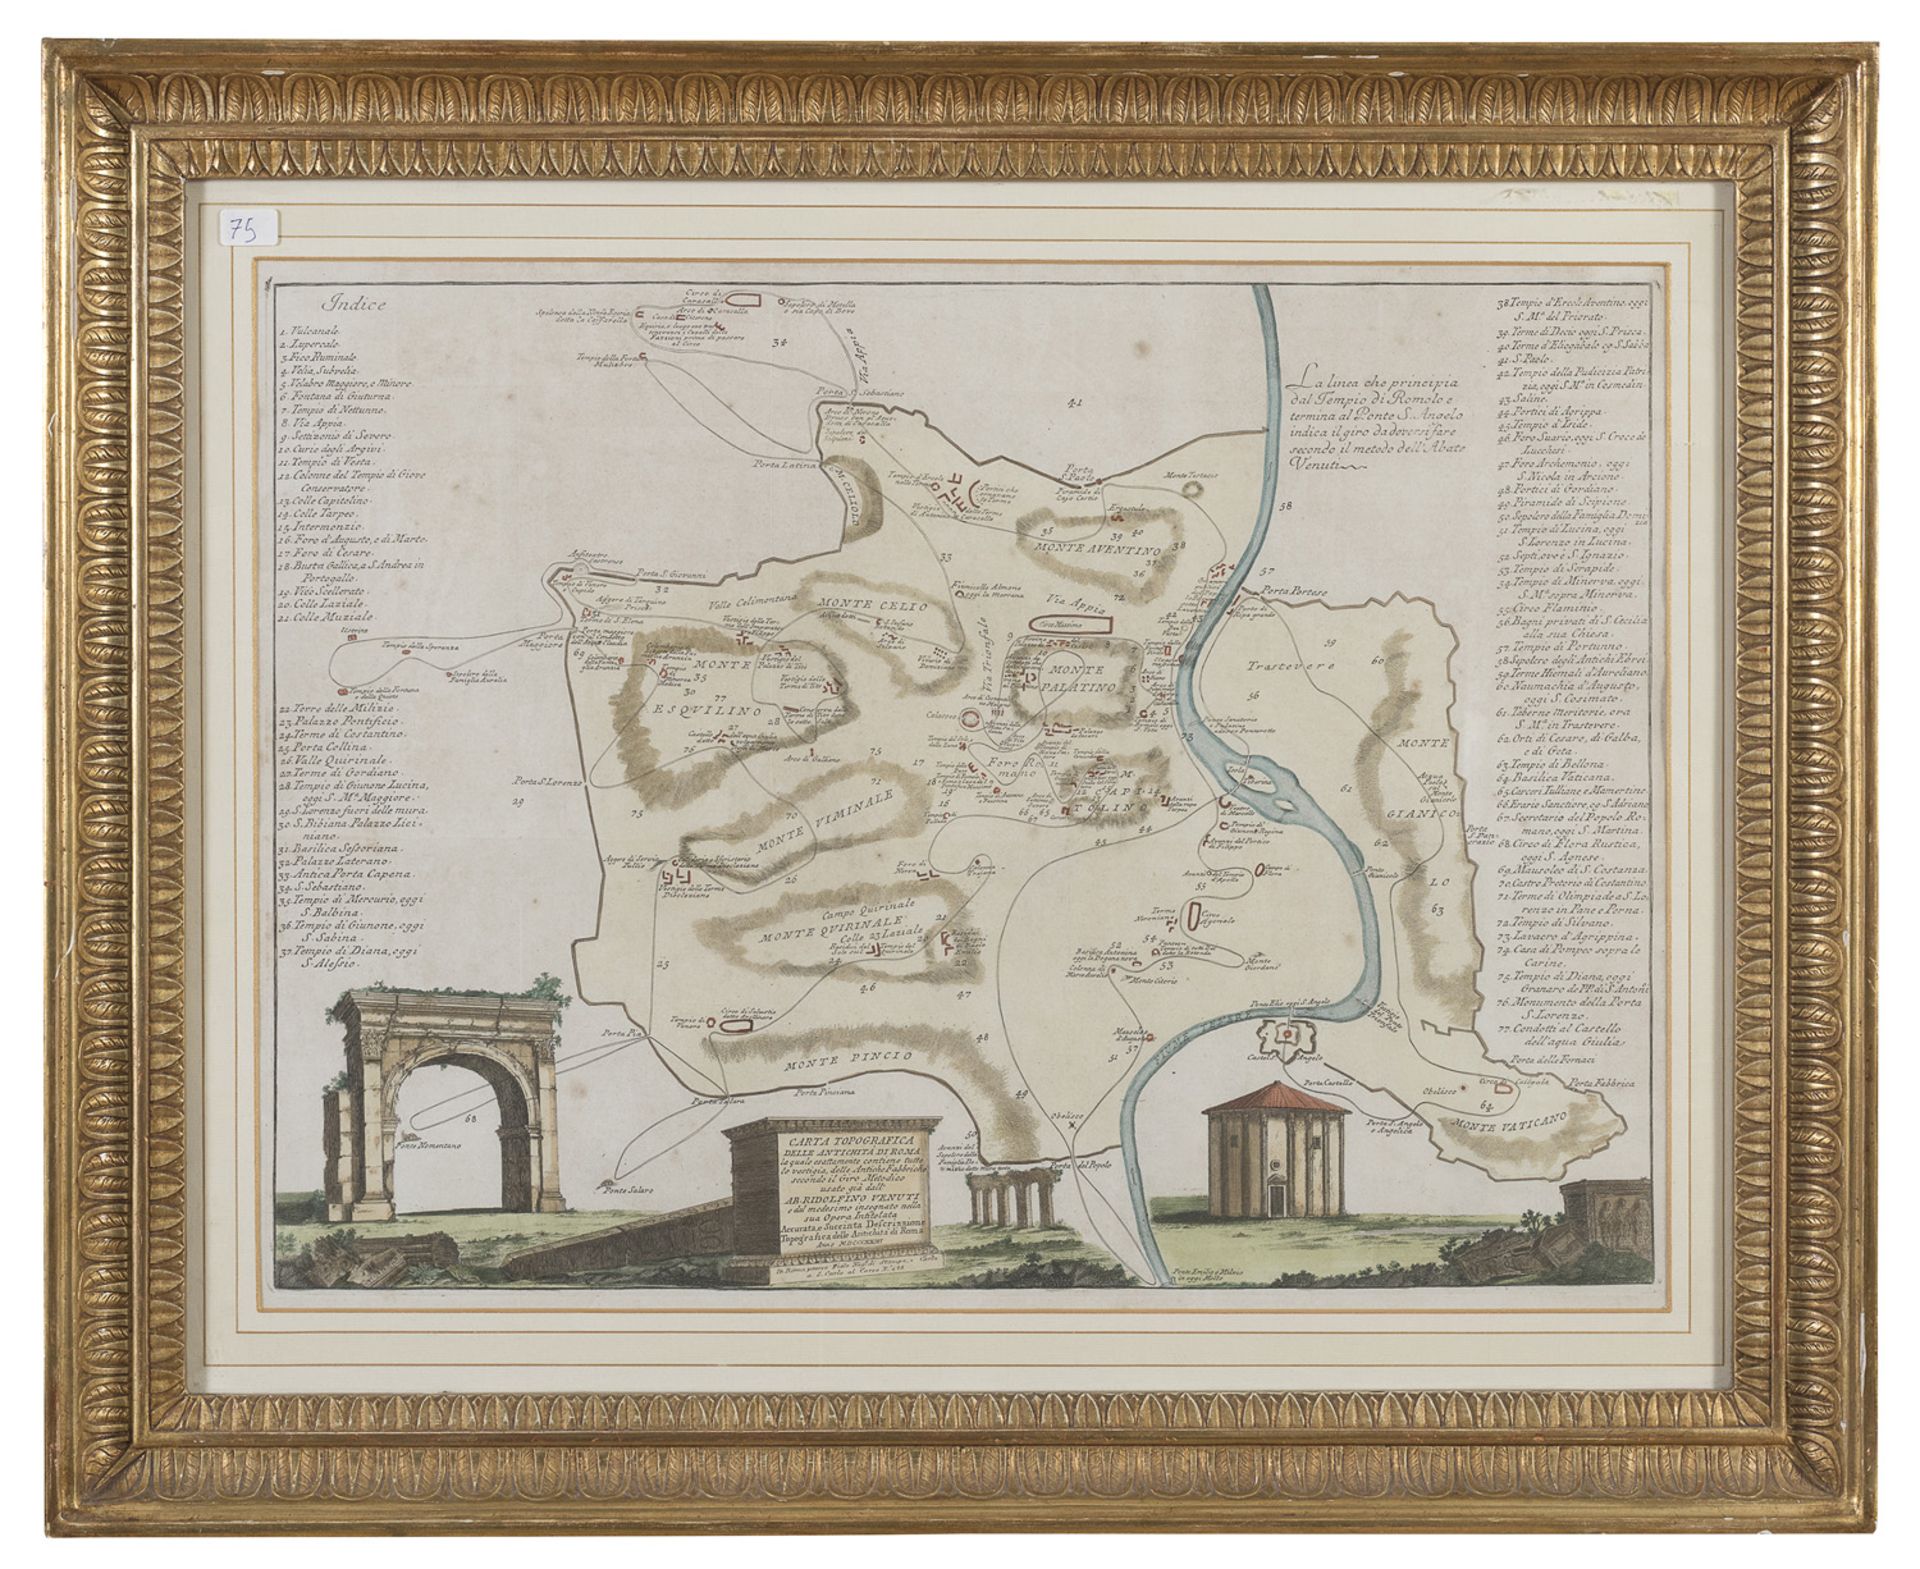 TOPOGRAPHIC MAP OF THE ANTIQUITIES OF ROME 19TH CENTURY